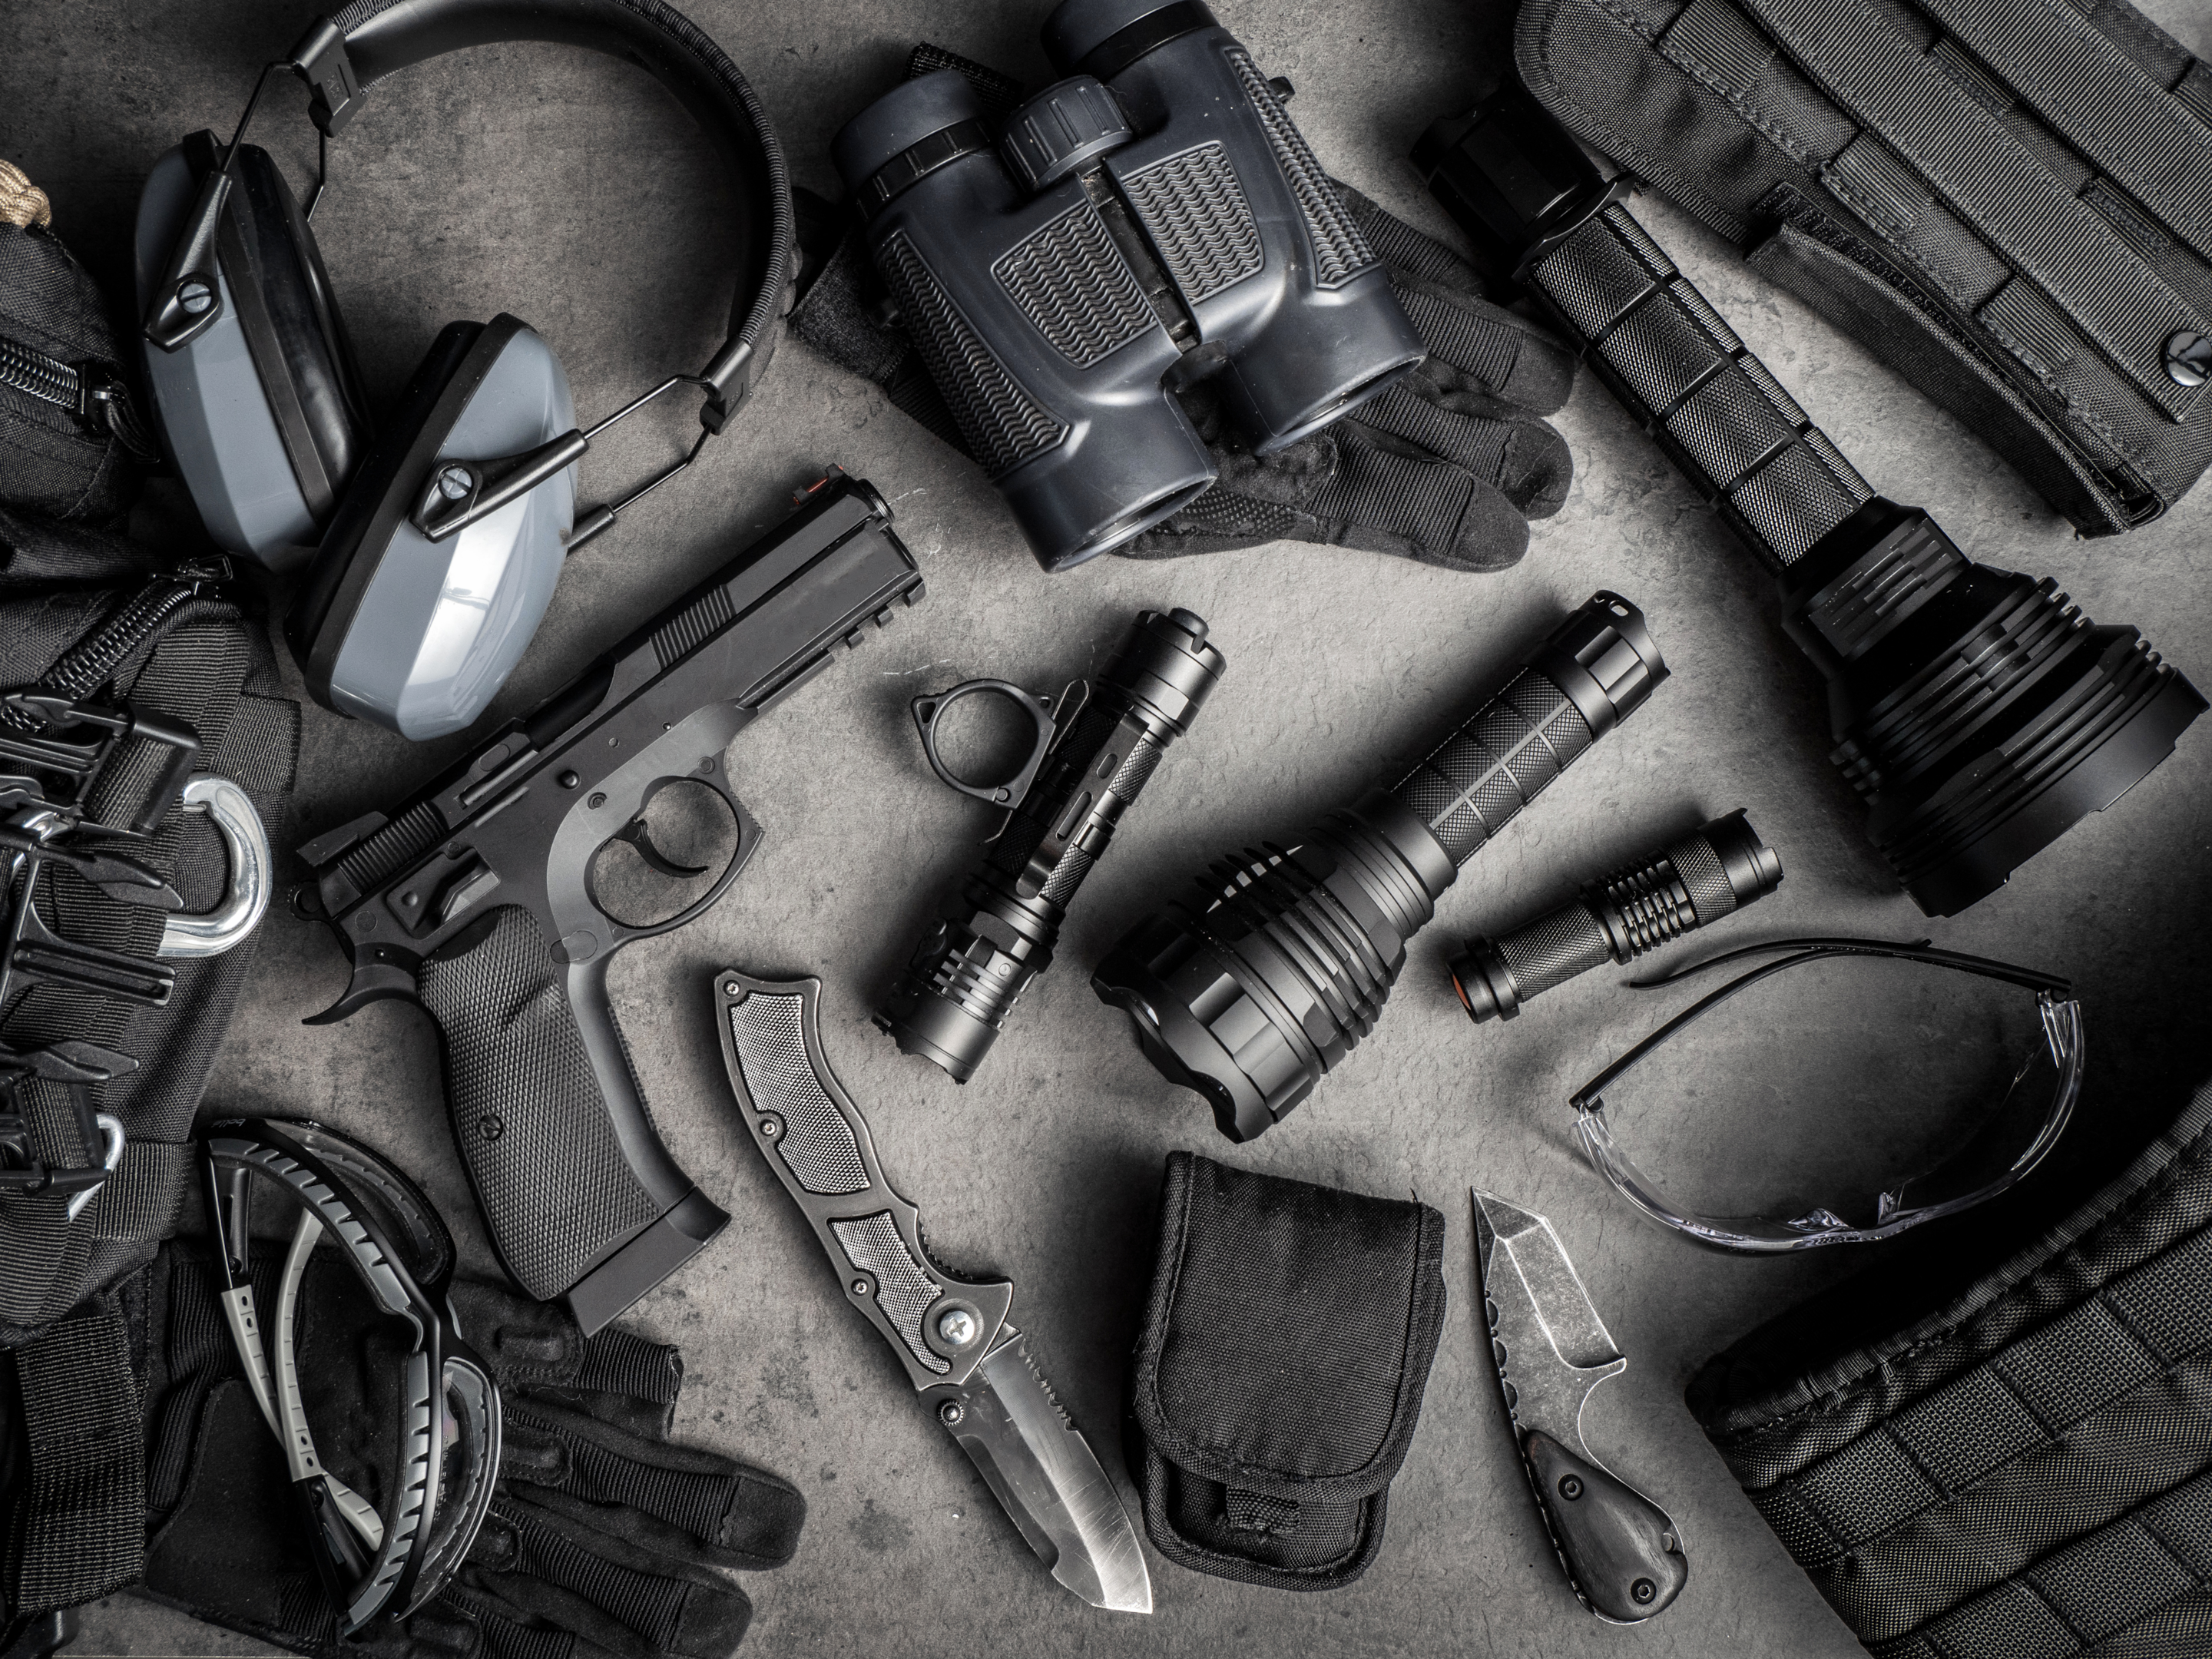 Special force agent tactical gear table.